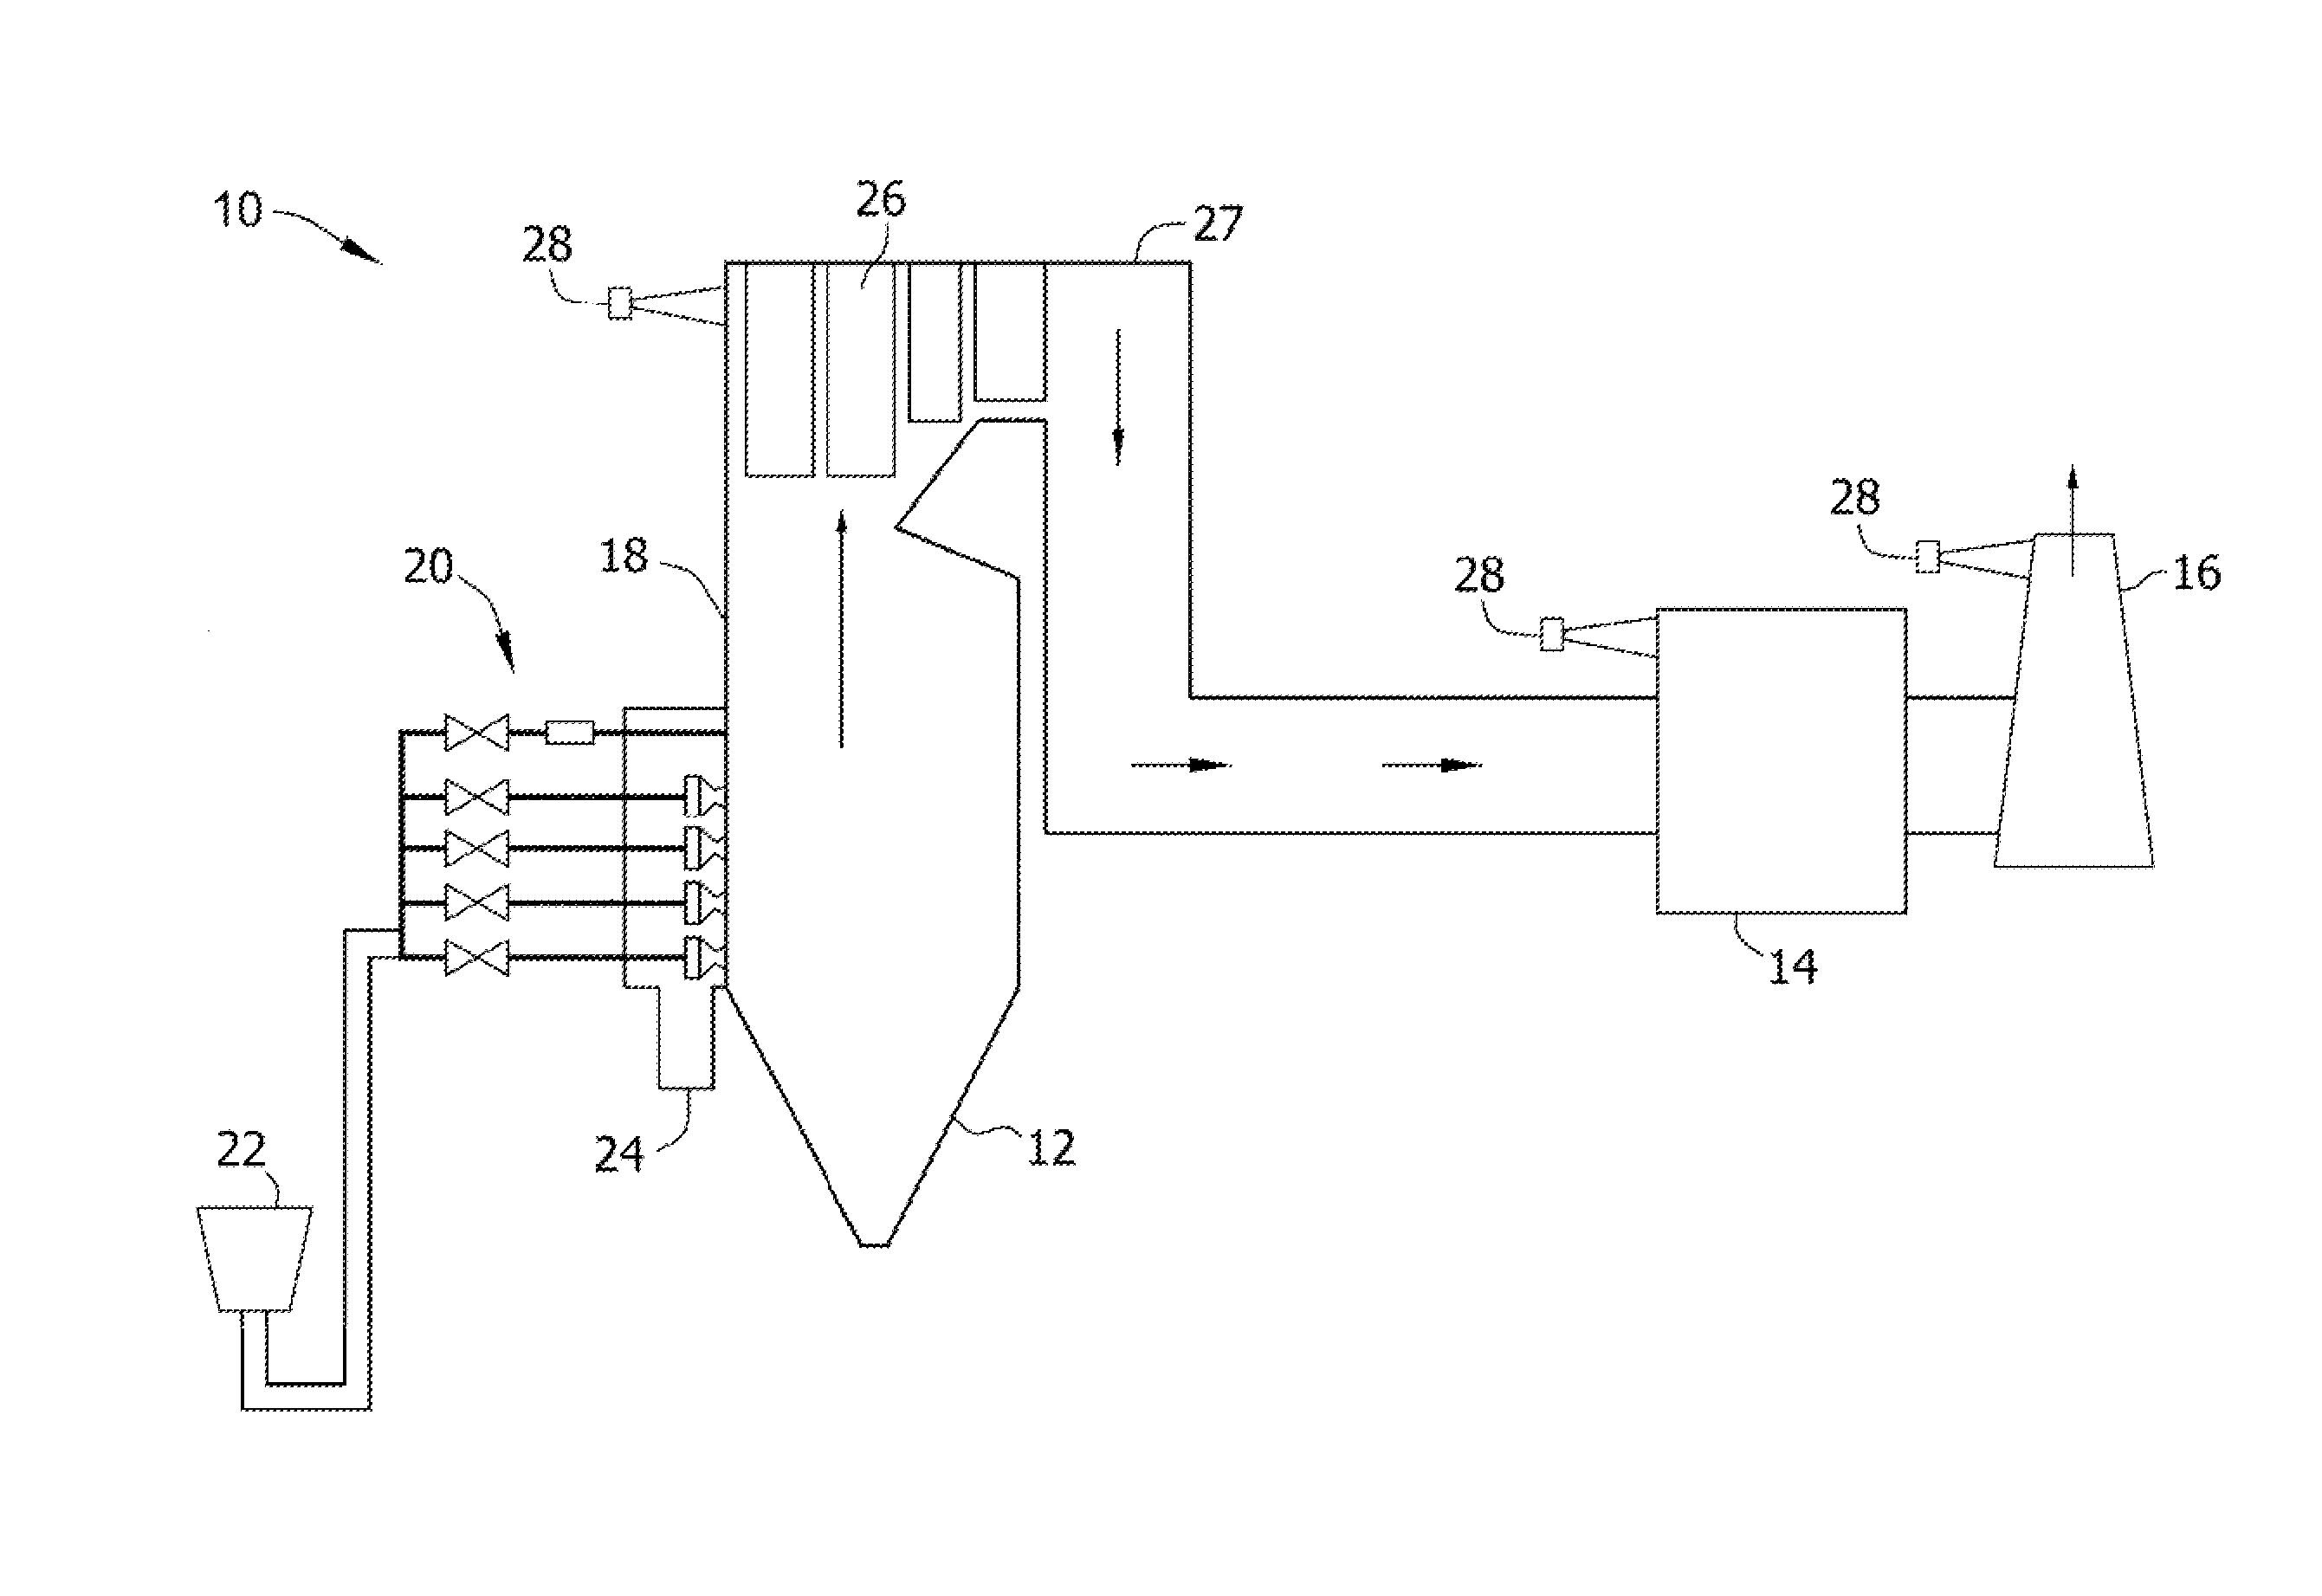 Acoustic cleaning assembly for use in power generation systems and method of assembling same